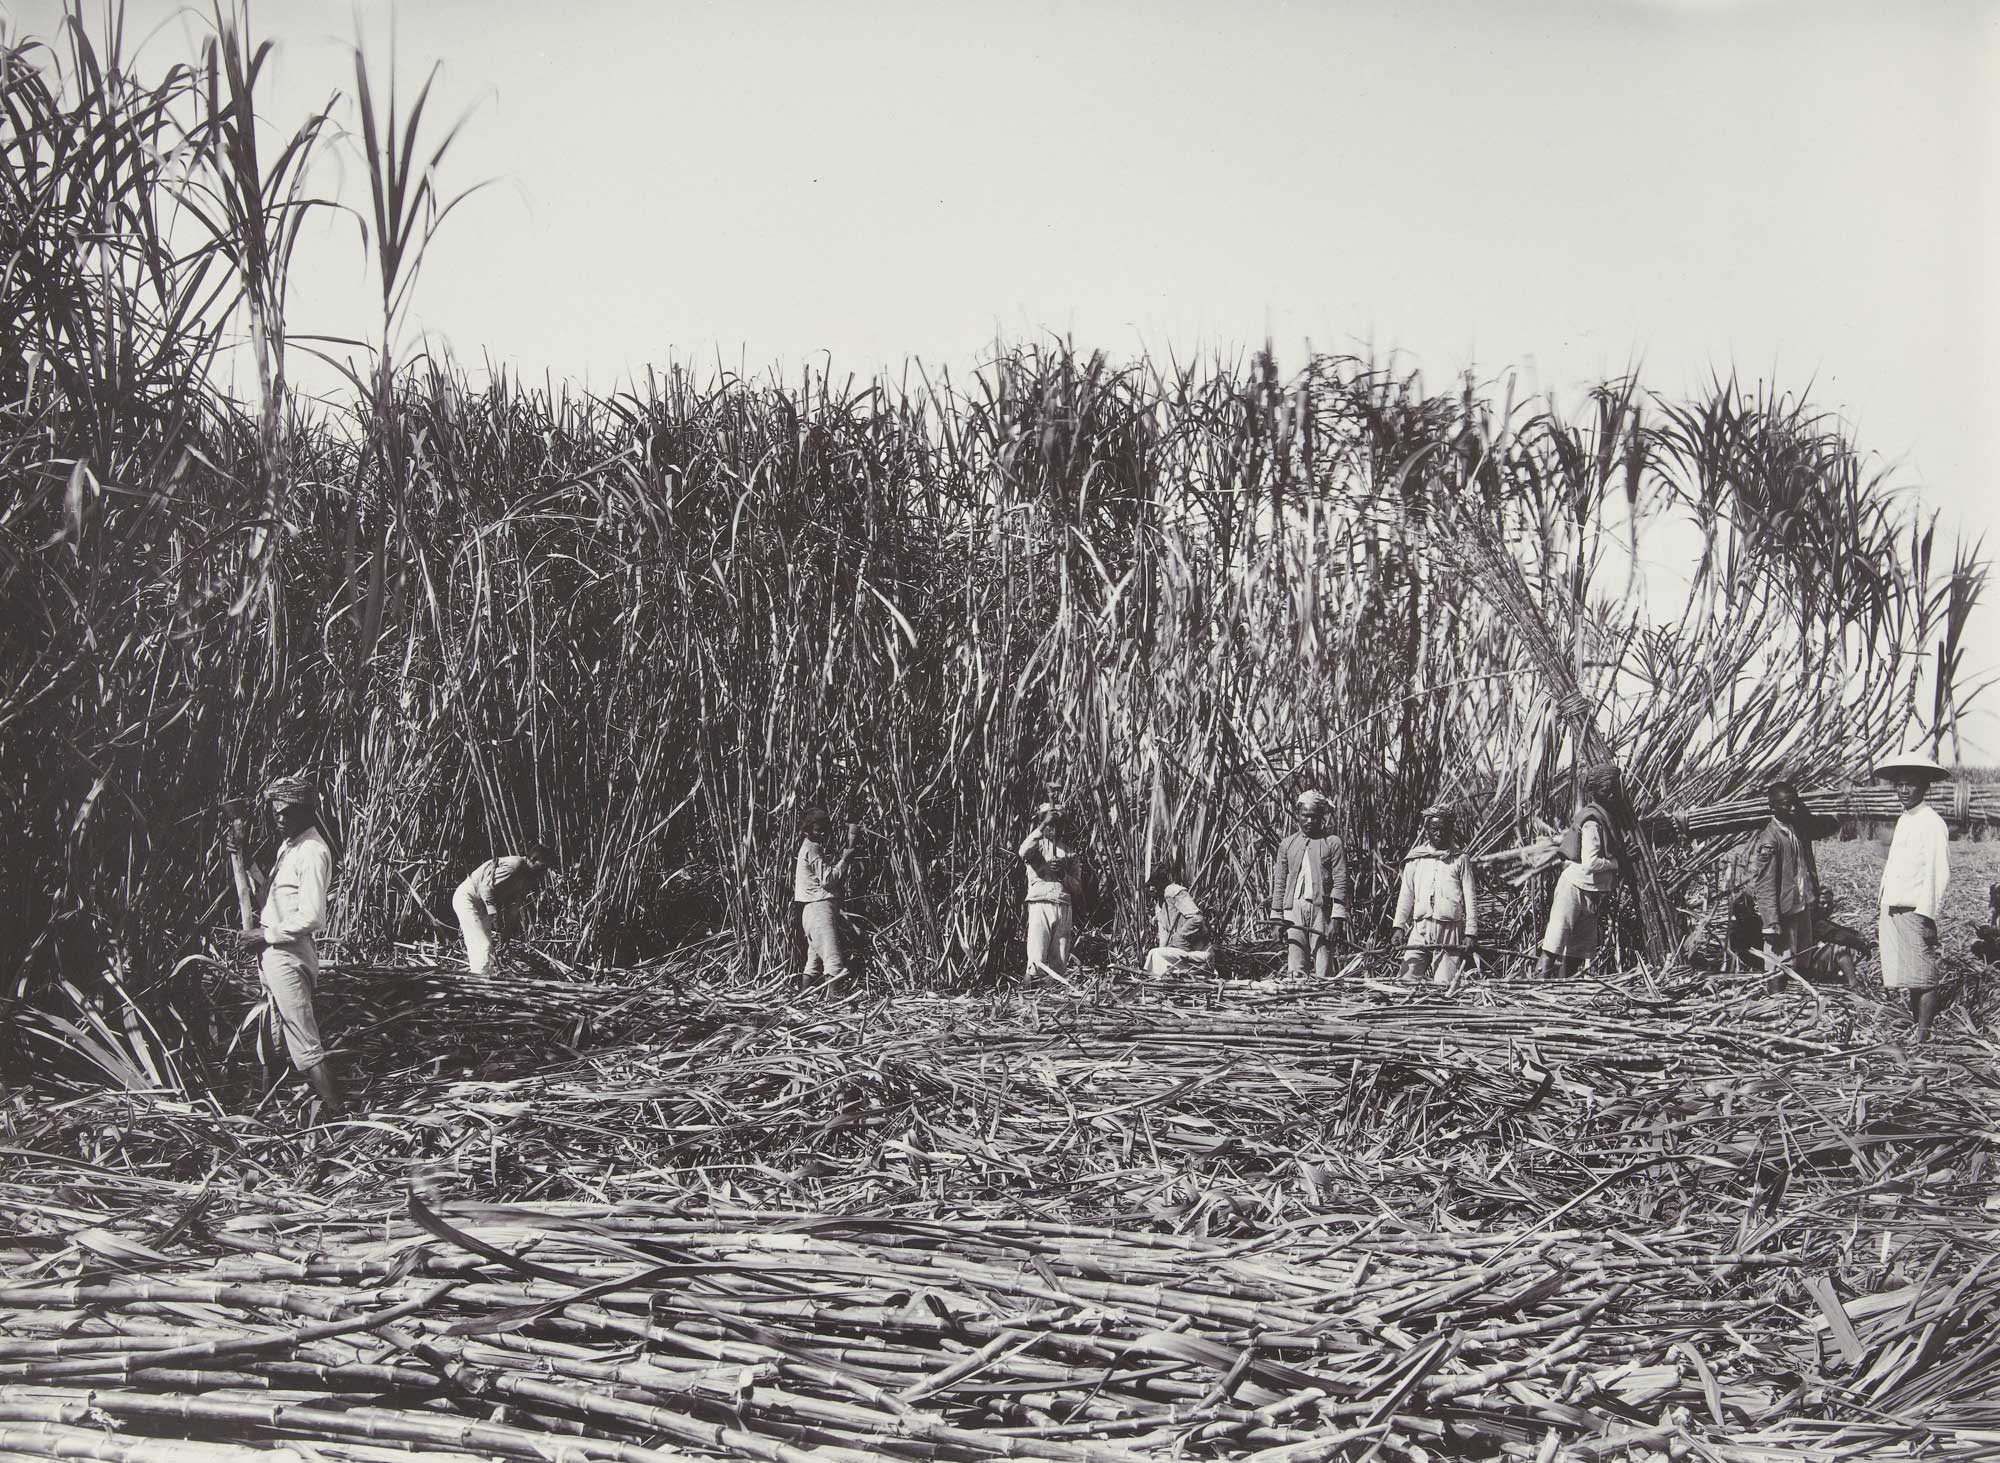 Black and white photograph of people harvesting sugarcane on Java sometime between about 1890 and 1911. The photo shows a row of people standing in front of sugarcane plants in a field. Numerous cut sugarcane stalks can be seen in the foreground.